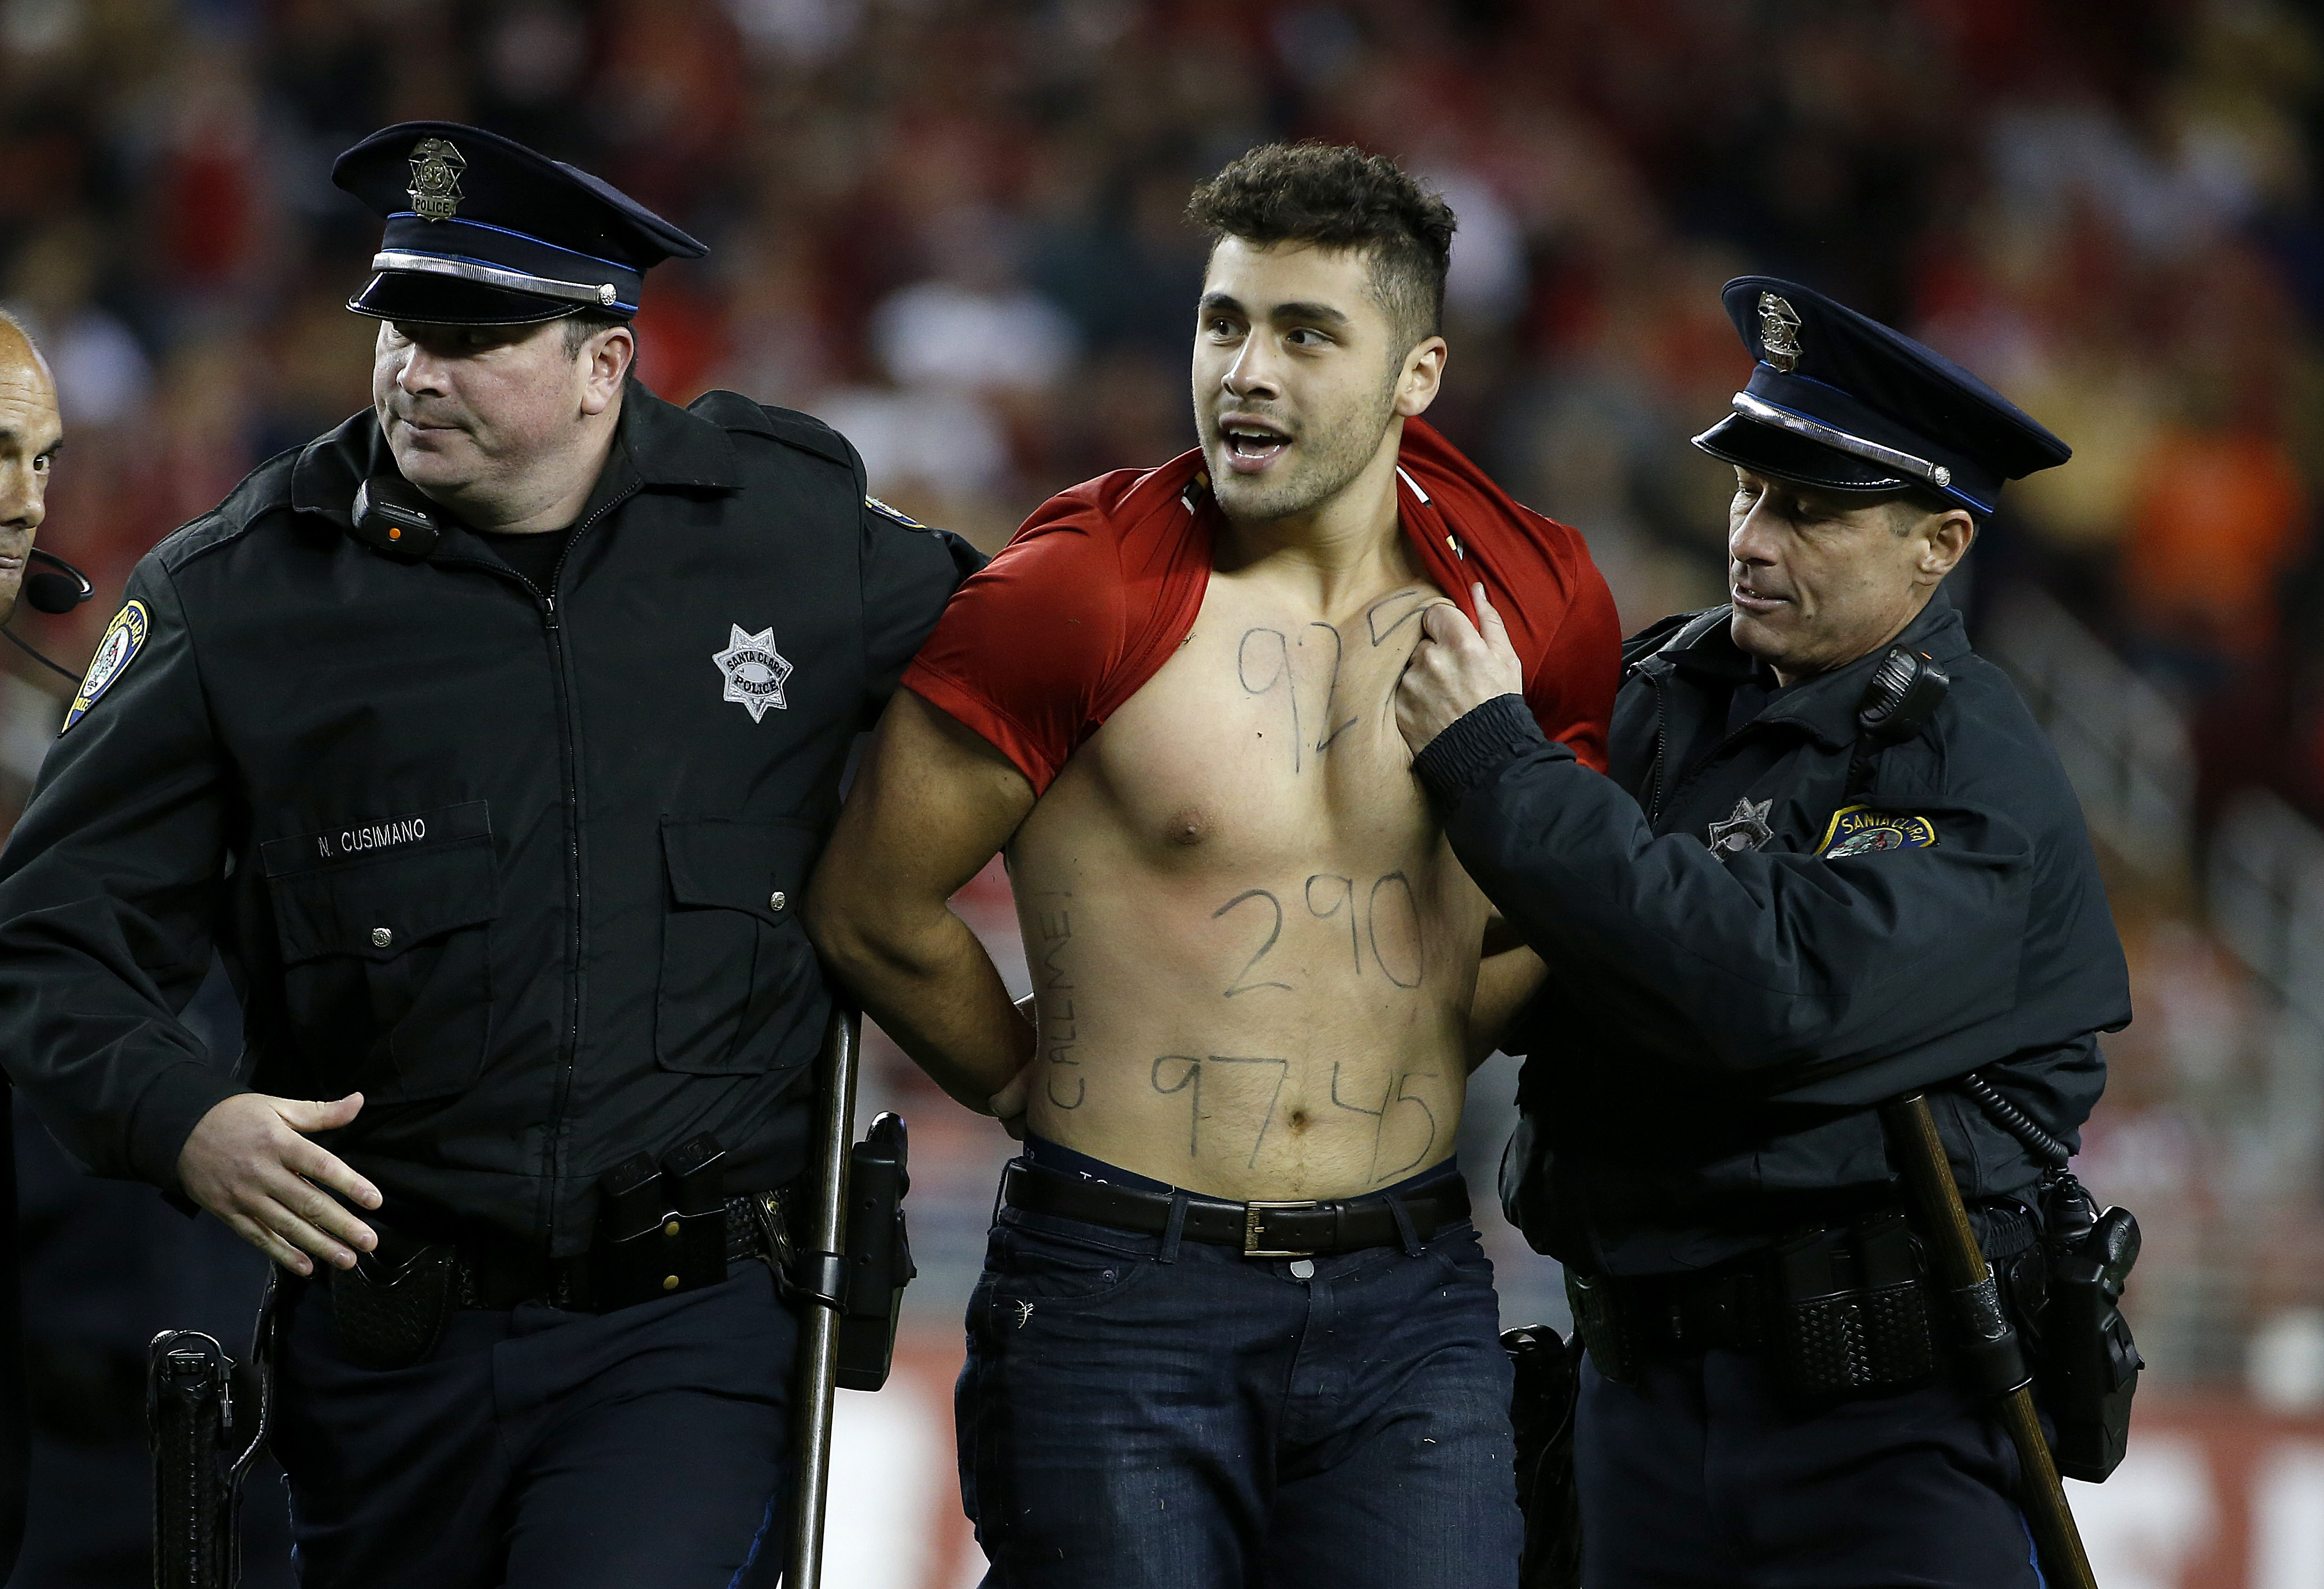 A fan is taken off the field by Santa Clara police officers during the second half of an NFL football game between the San Francisco 49ers and the Los Angeles Rams in Santa Clara, Calif., Monday, Sept. 12, 2016. (AP Photo/Tony Avelar)